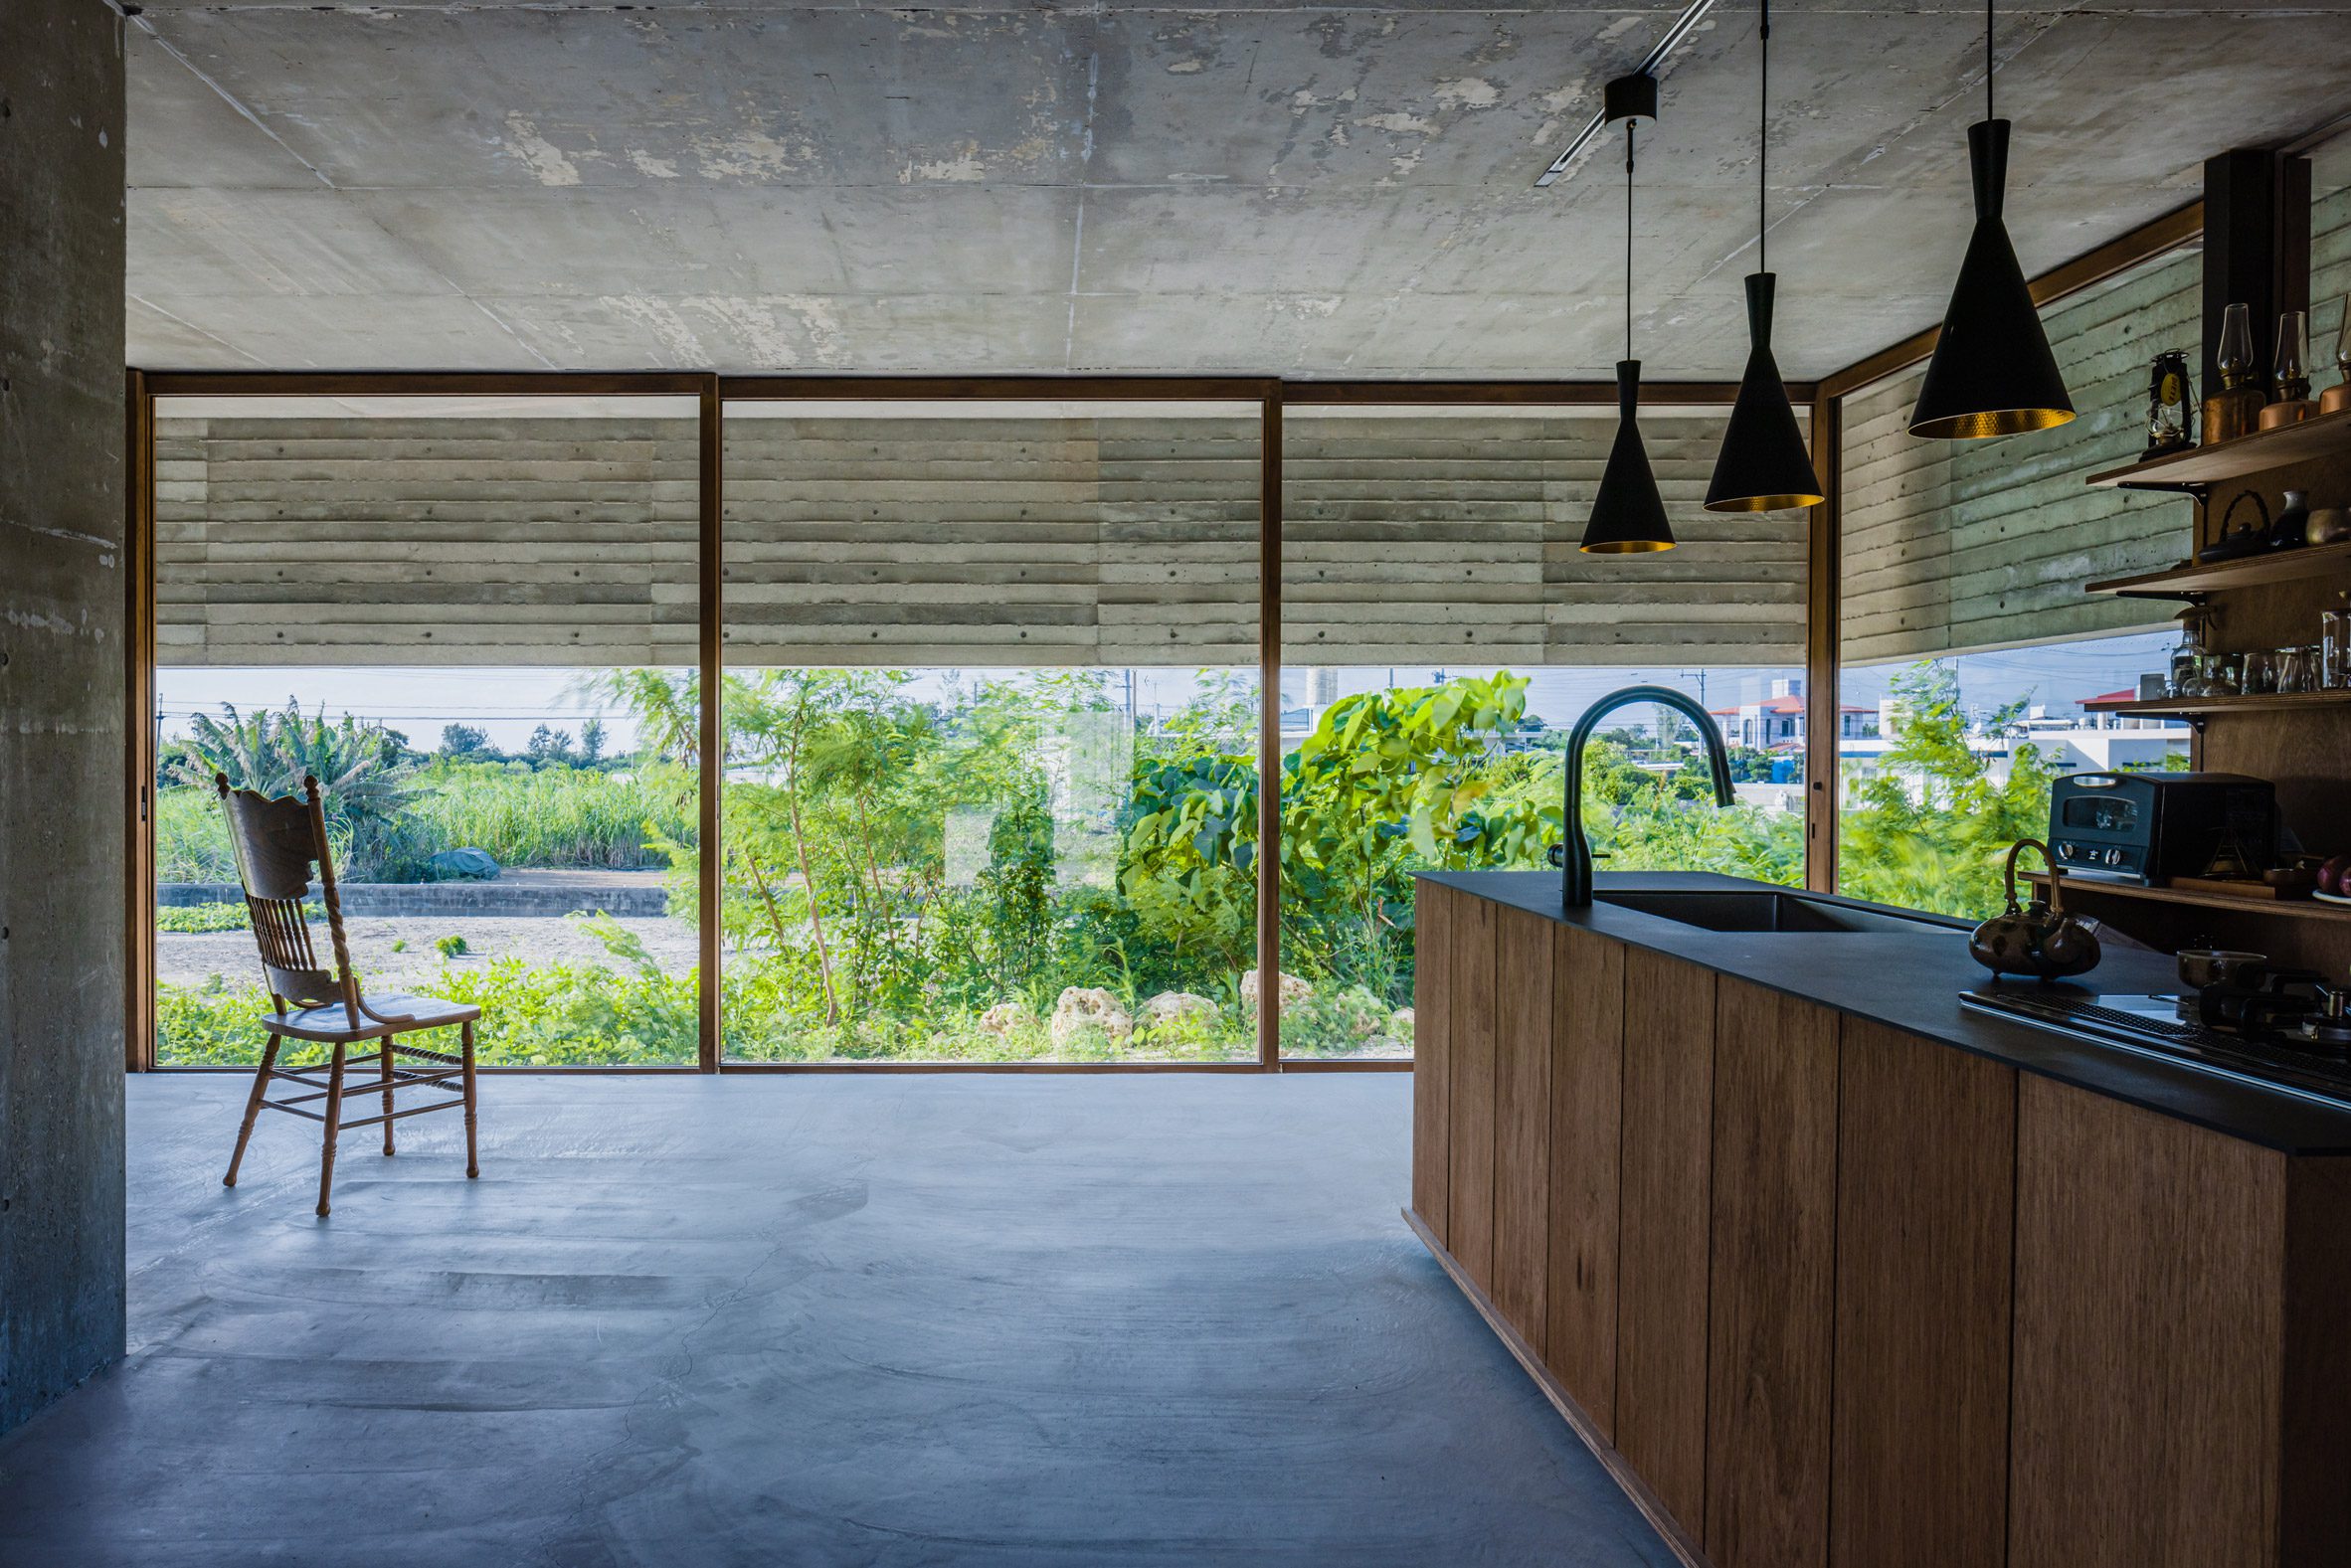 Kitchen of One-Legged House in Japan by IGArchitects